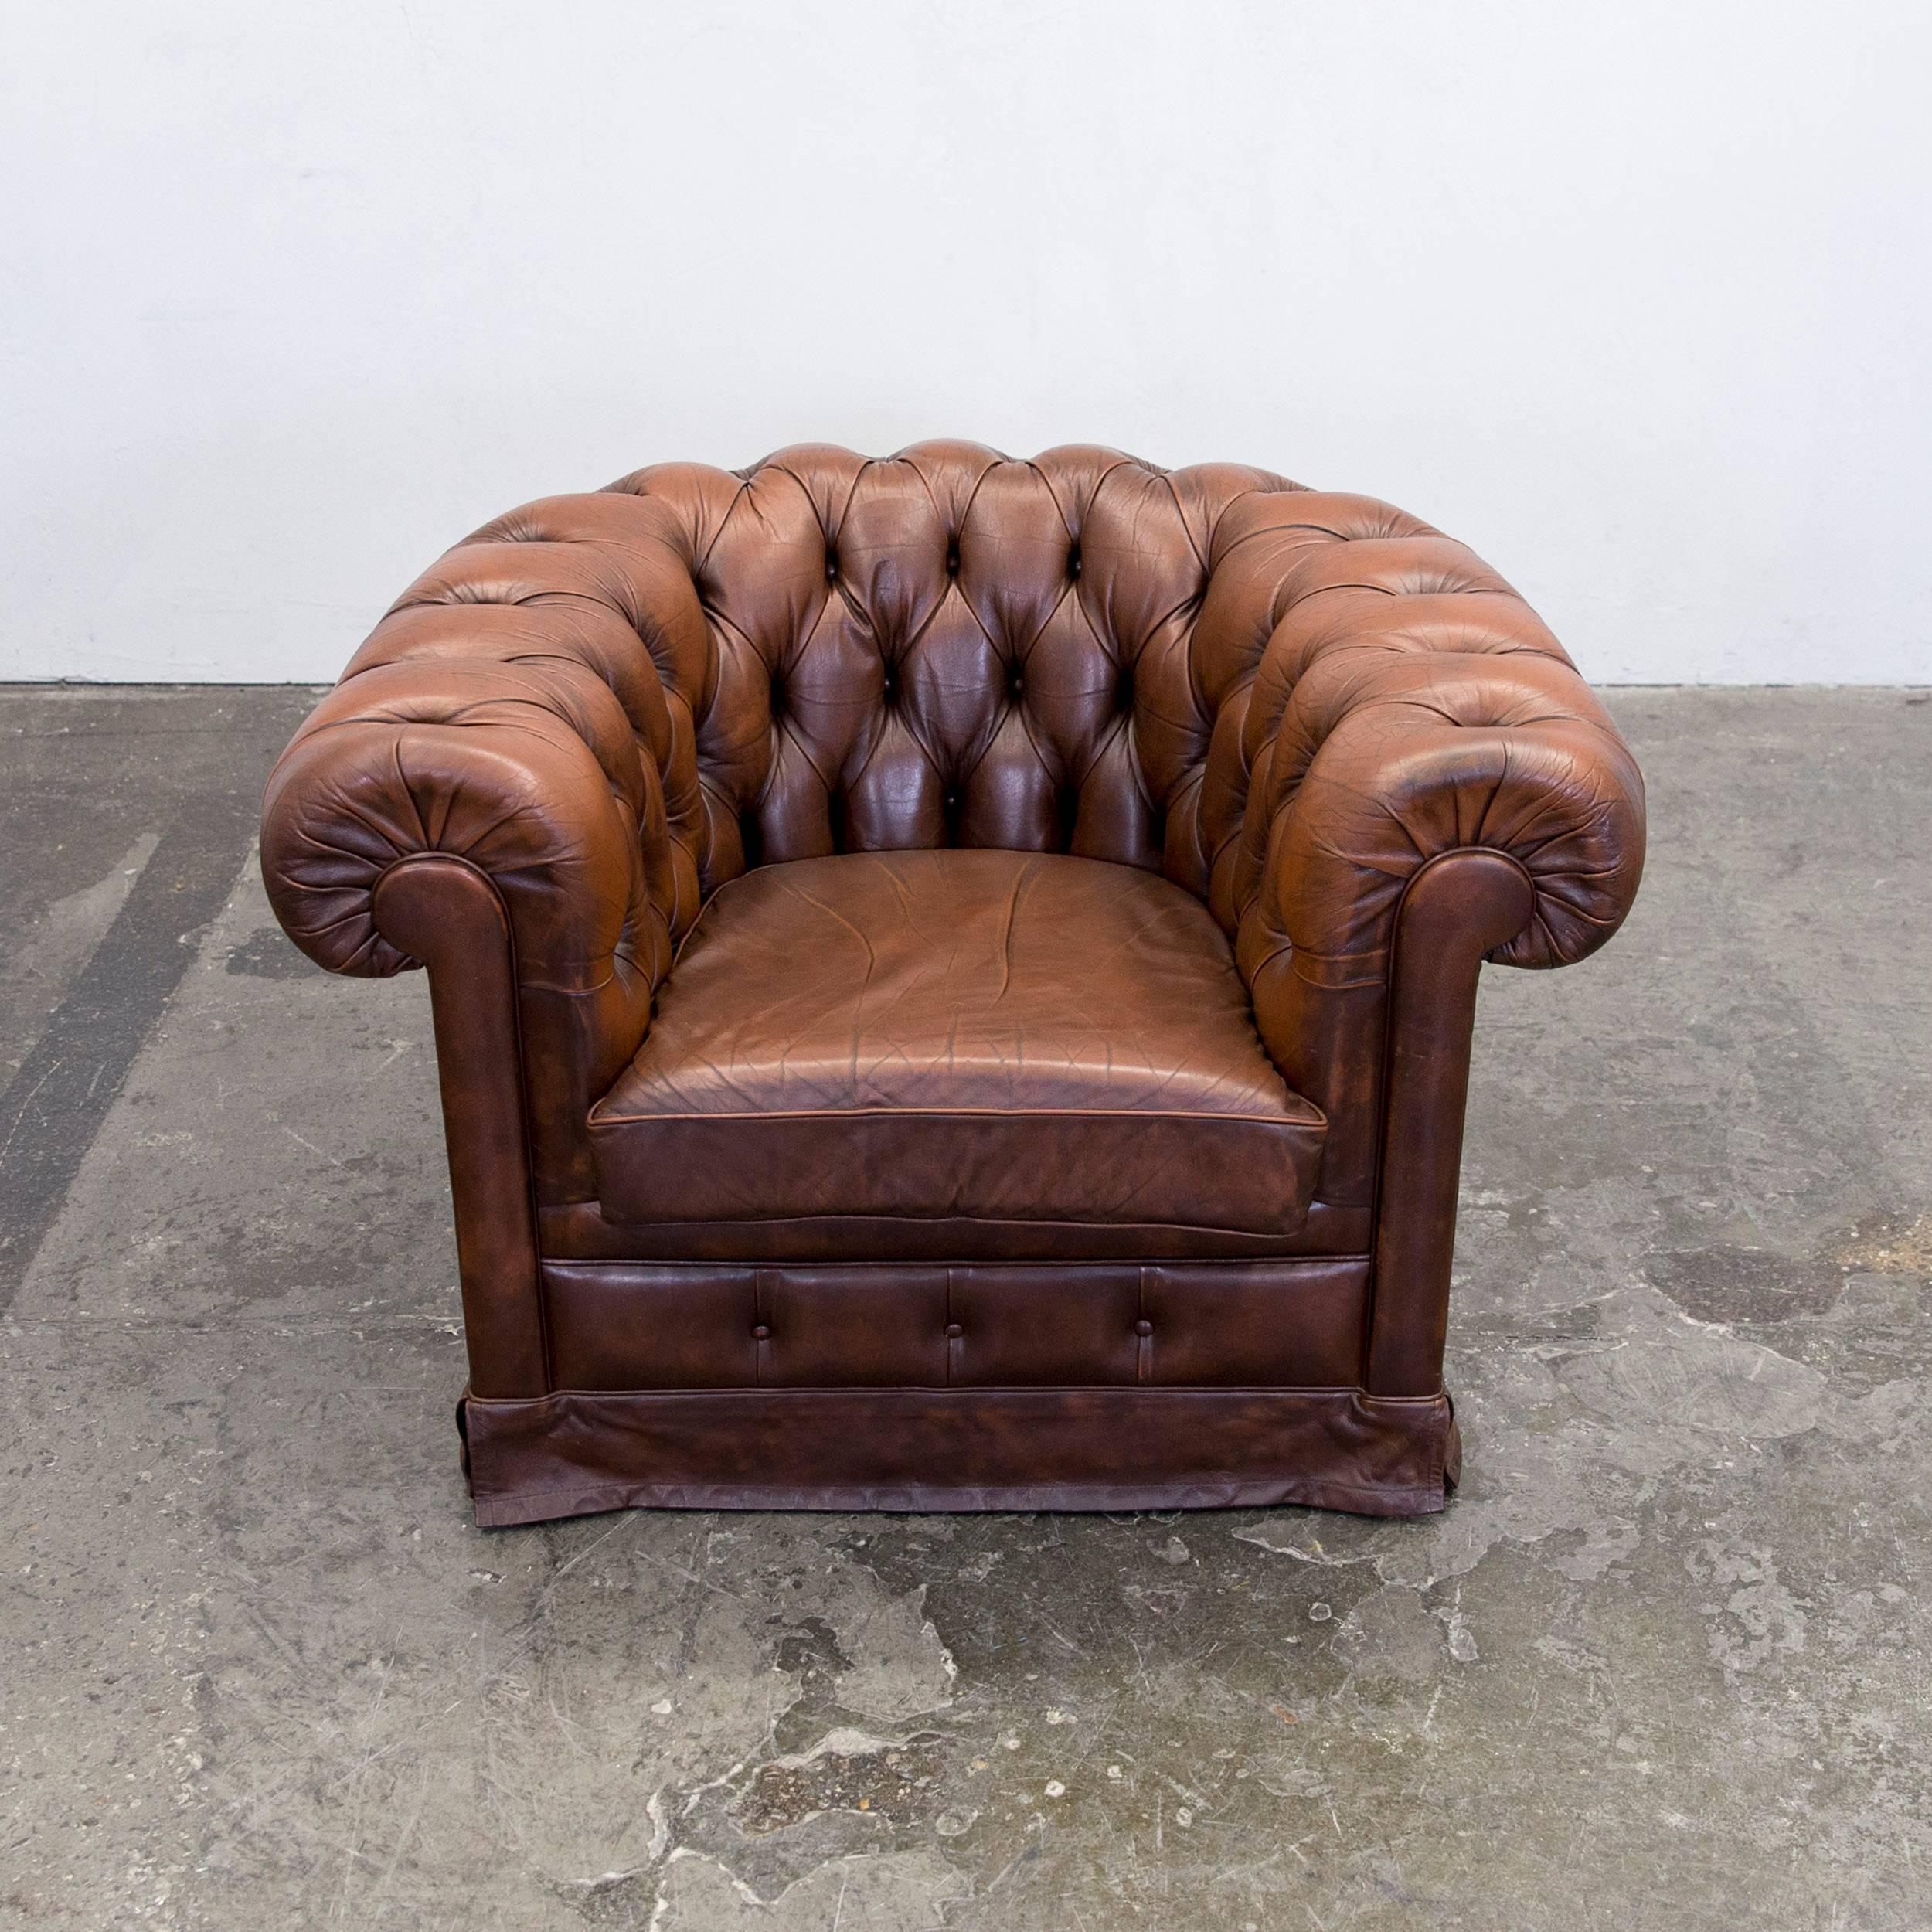 Original Chesterfield armchair in authentic brown leather.